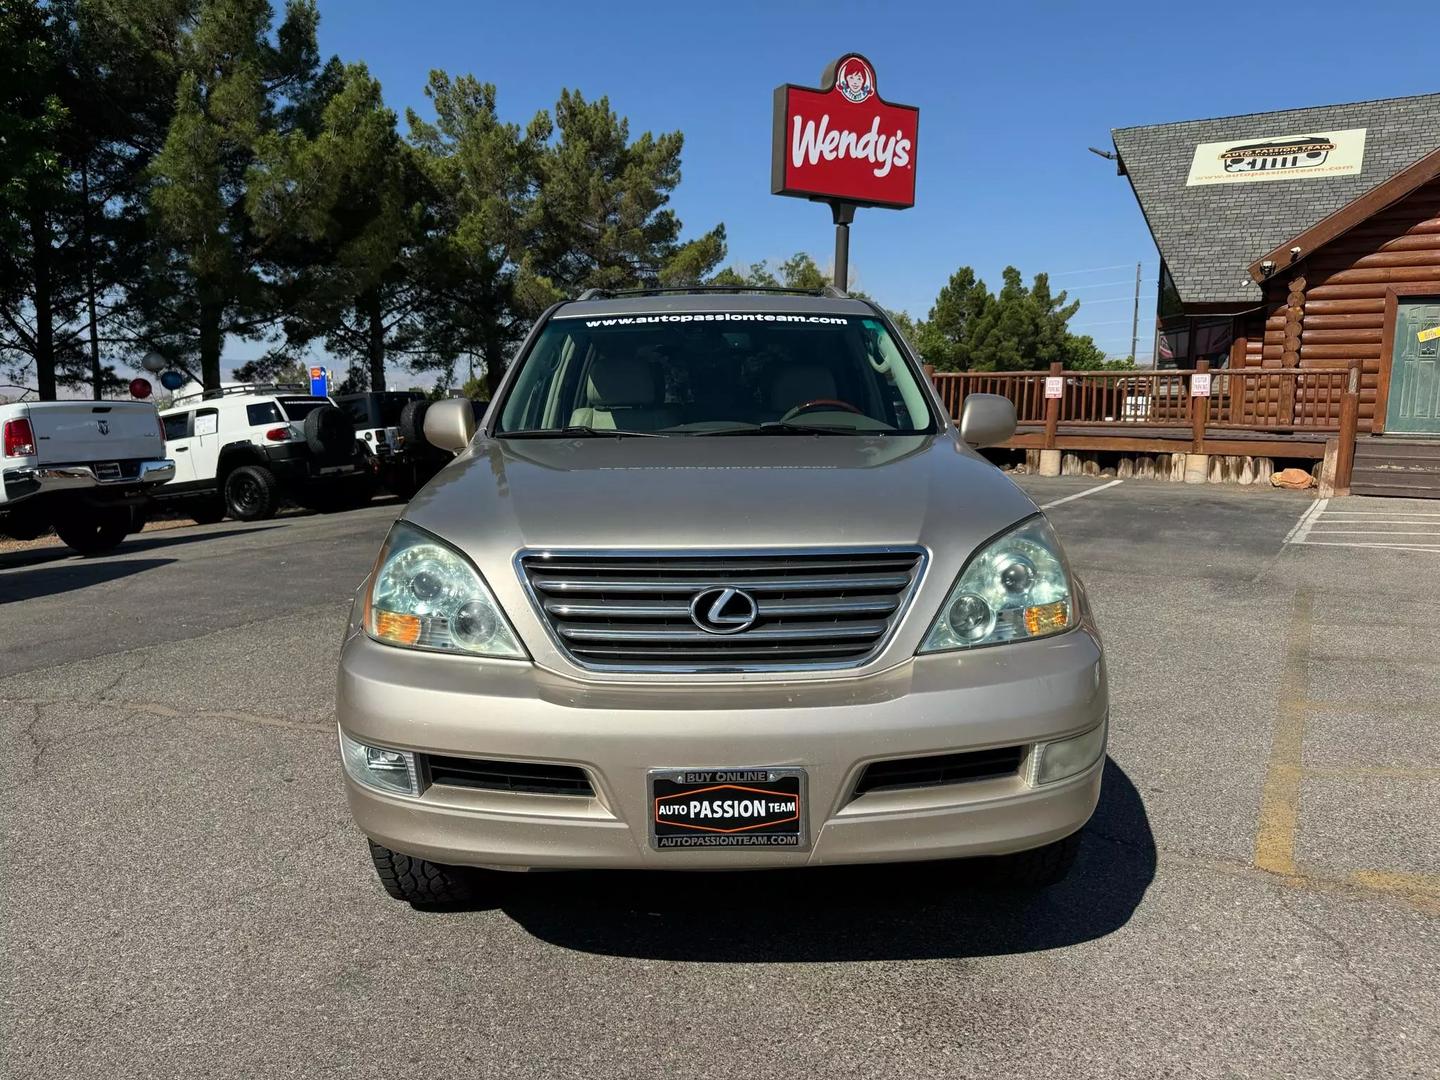 Used 2008 Lexus GX 470 with VIN JTJBT20X480155605 for sale in St. George, UT